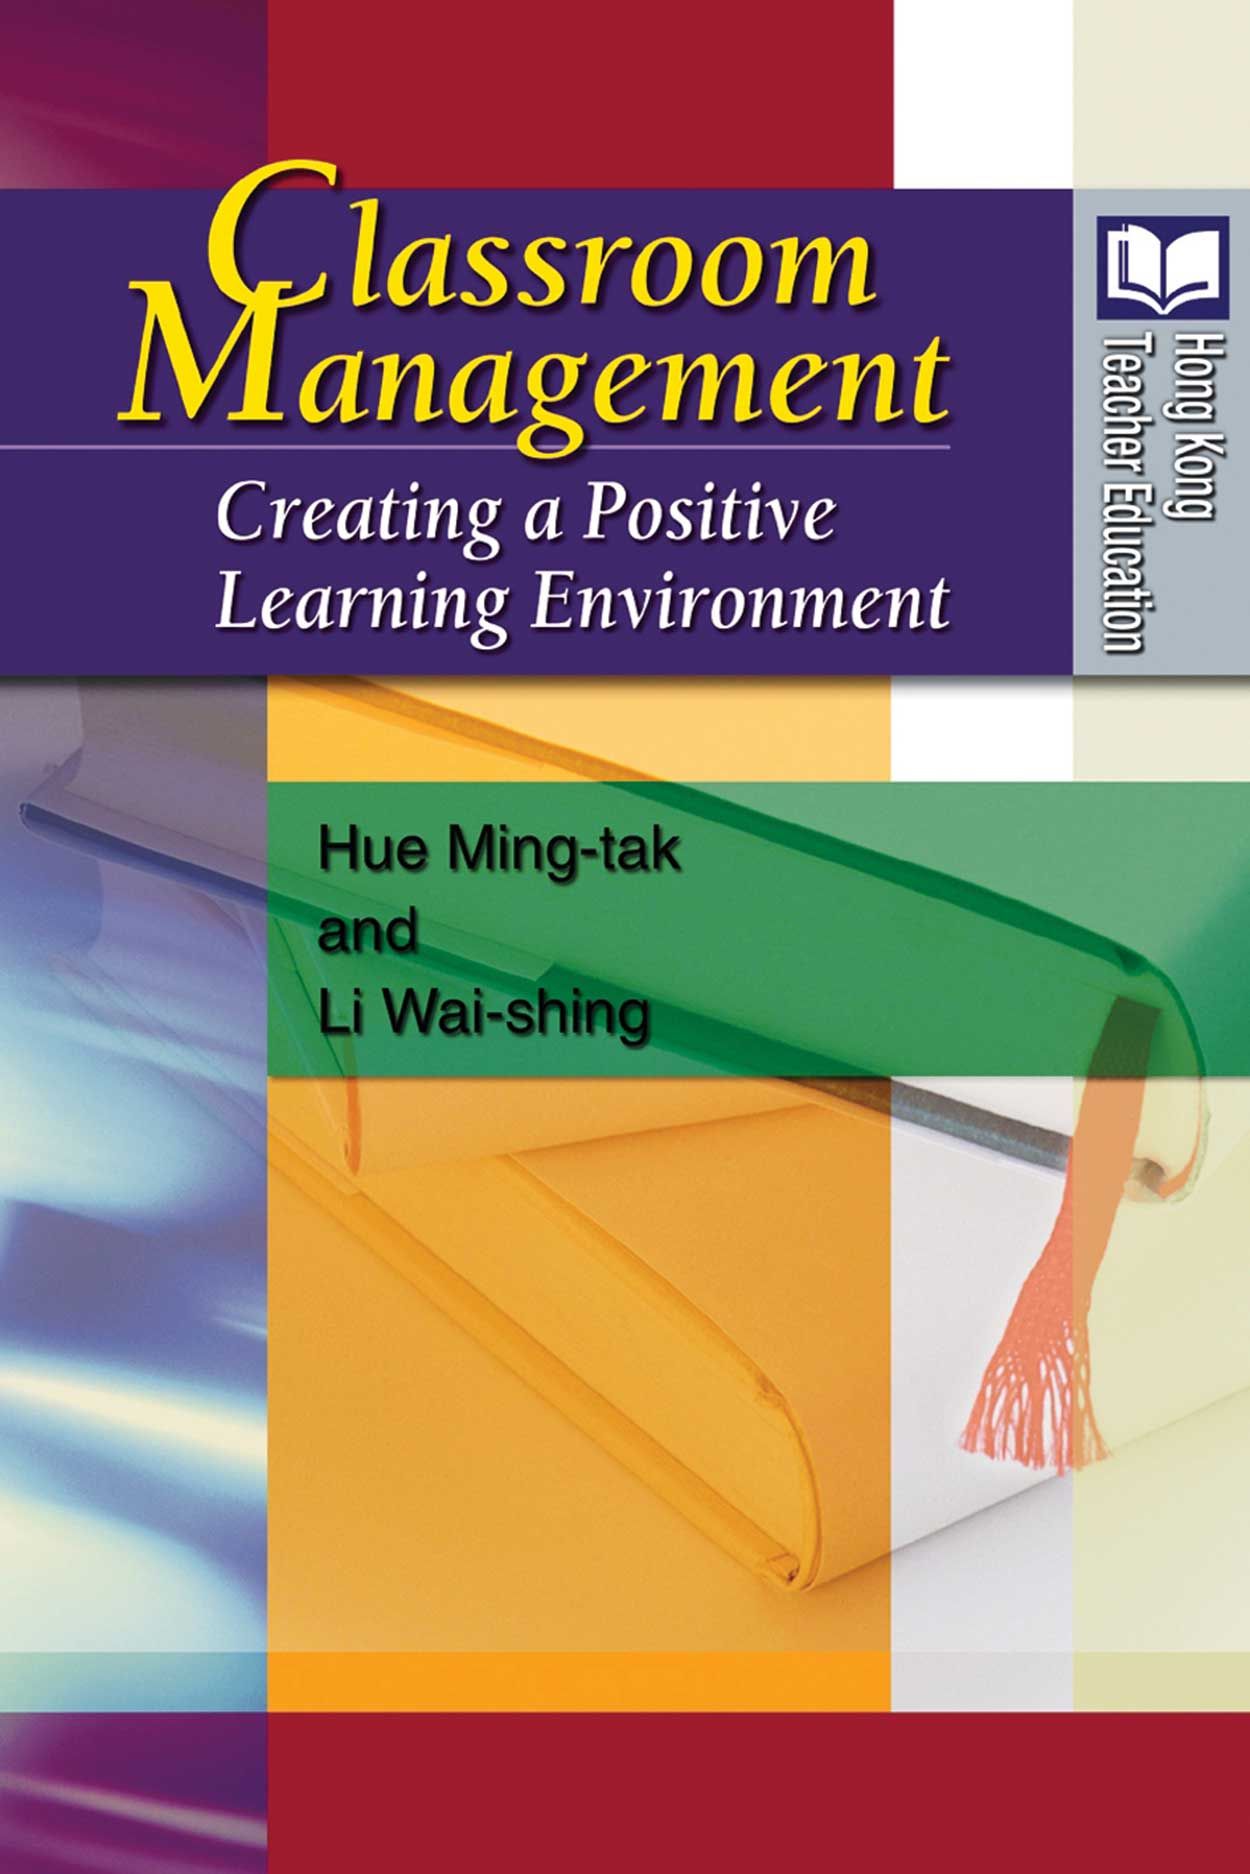 Classroom Management for an Effective Learning Environment - TeachHUB